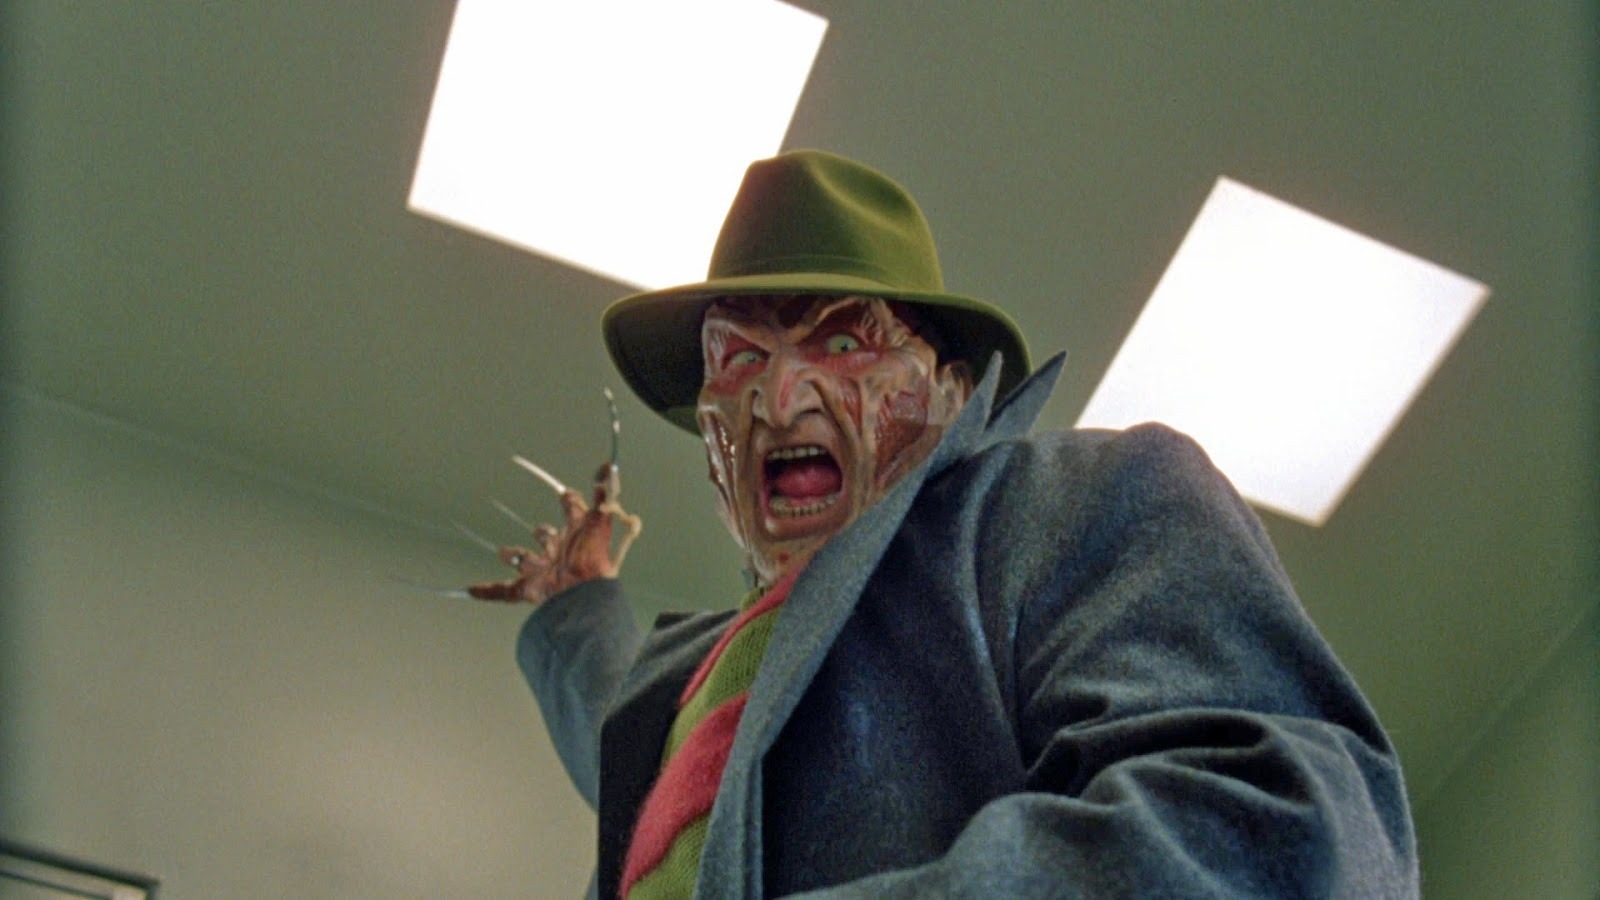 How to Watch the 'Elm Street' Movies, Including the Reboot and TV